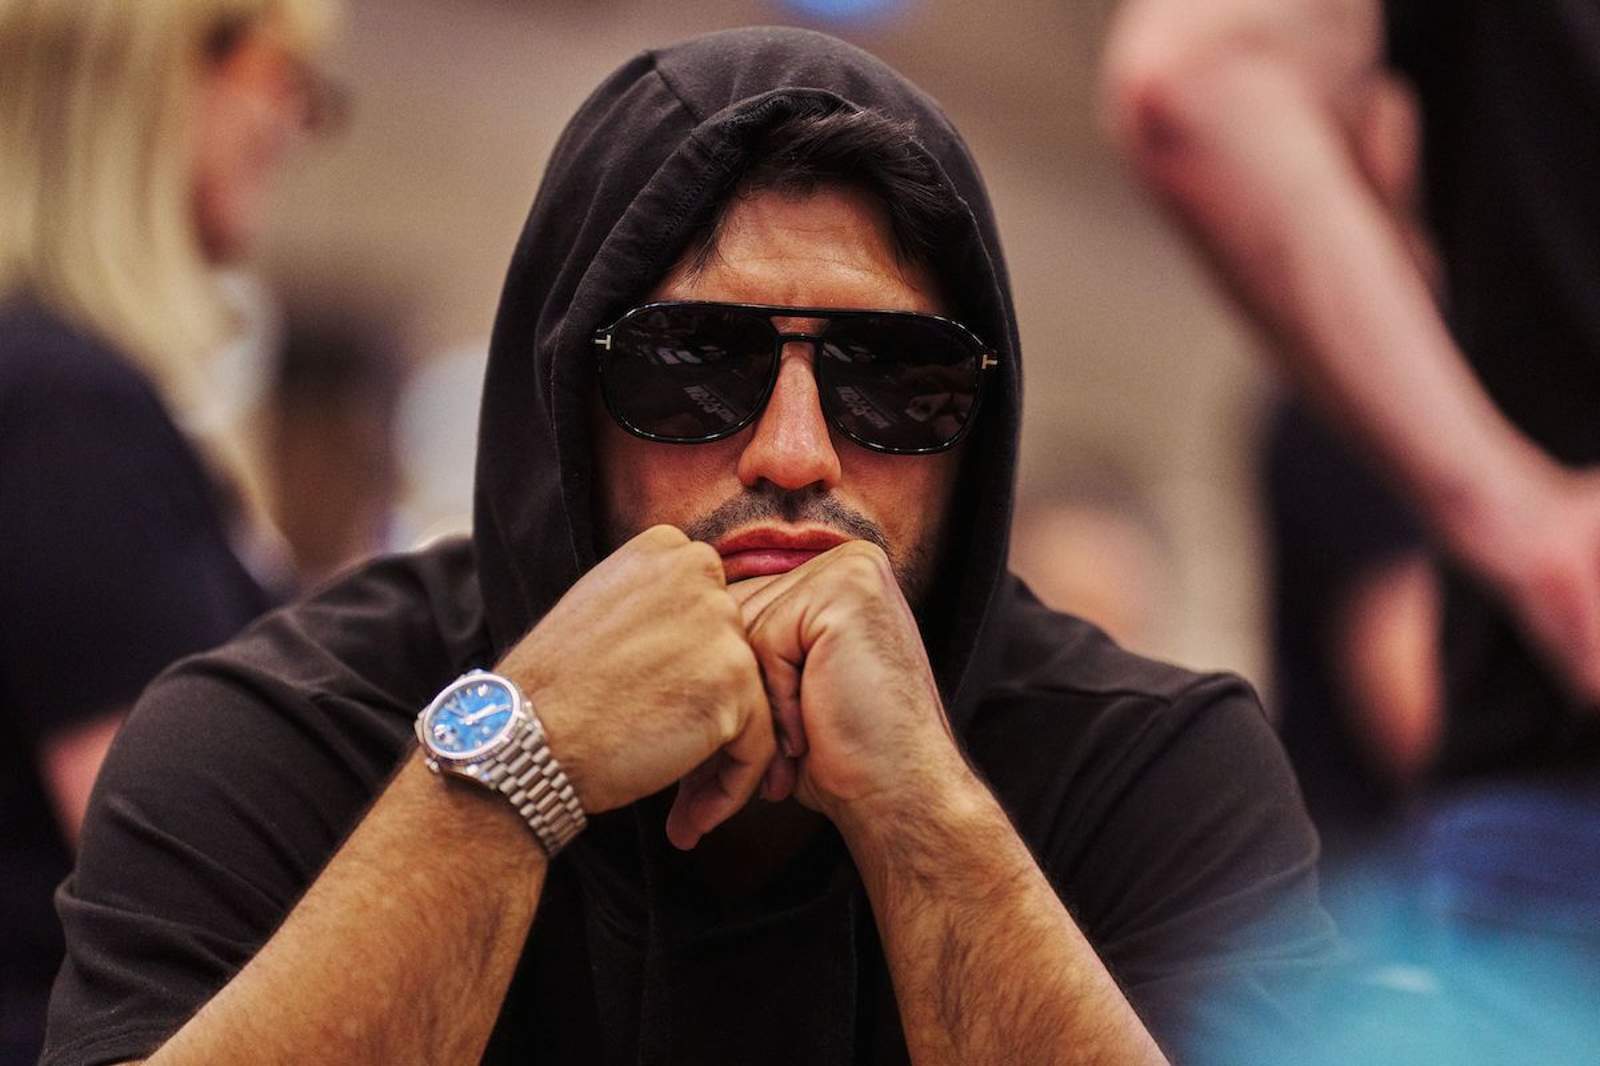 WSOP 2023 Day 37 Recap: Day 1C of WSOP Main Event Sees Agüero Thrive and Negreanu Survive with Record in Sight